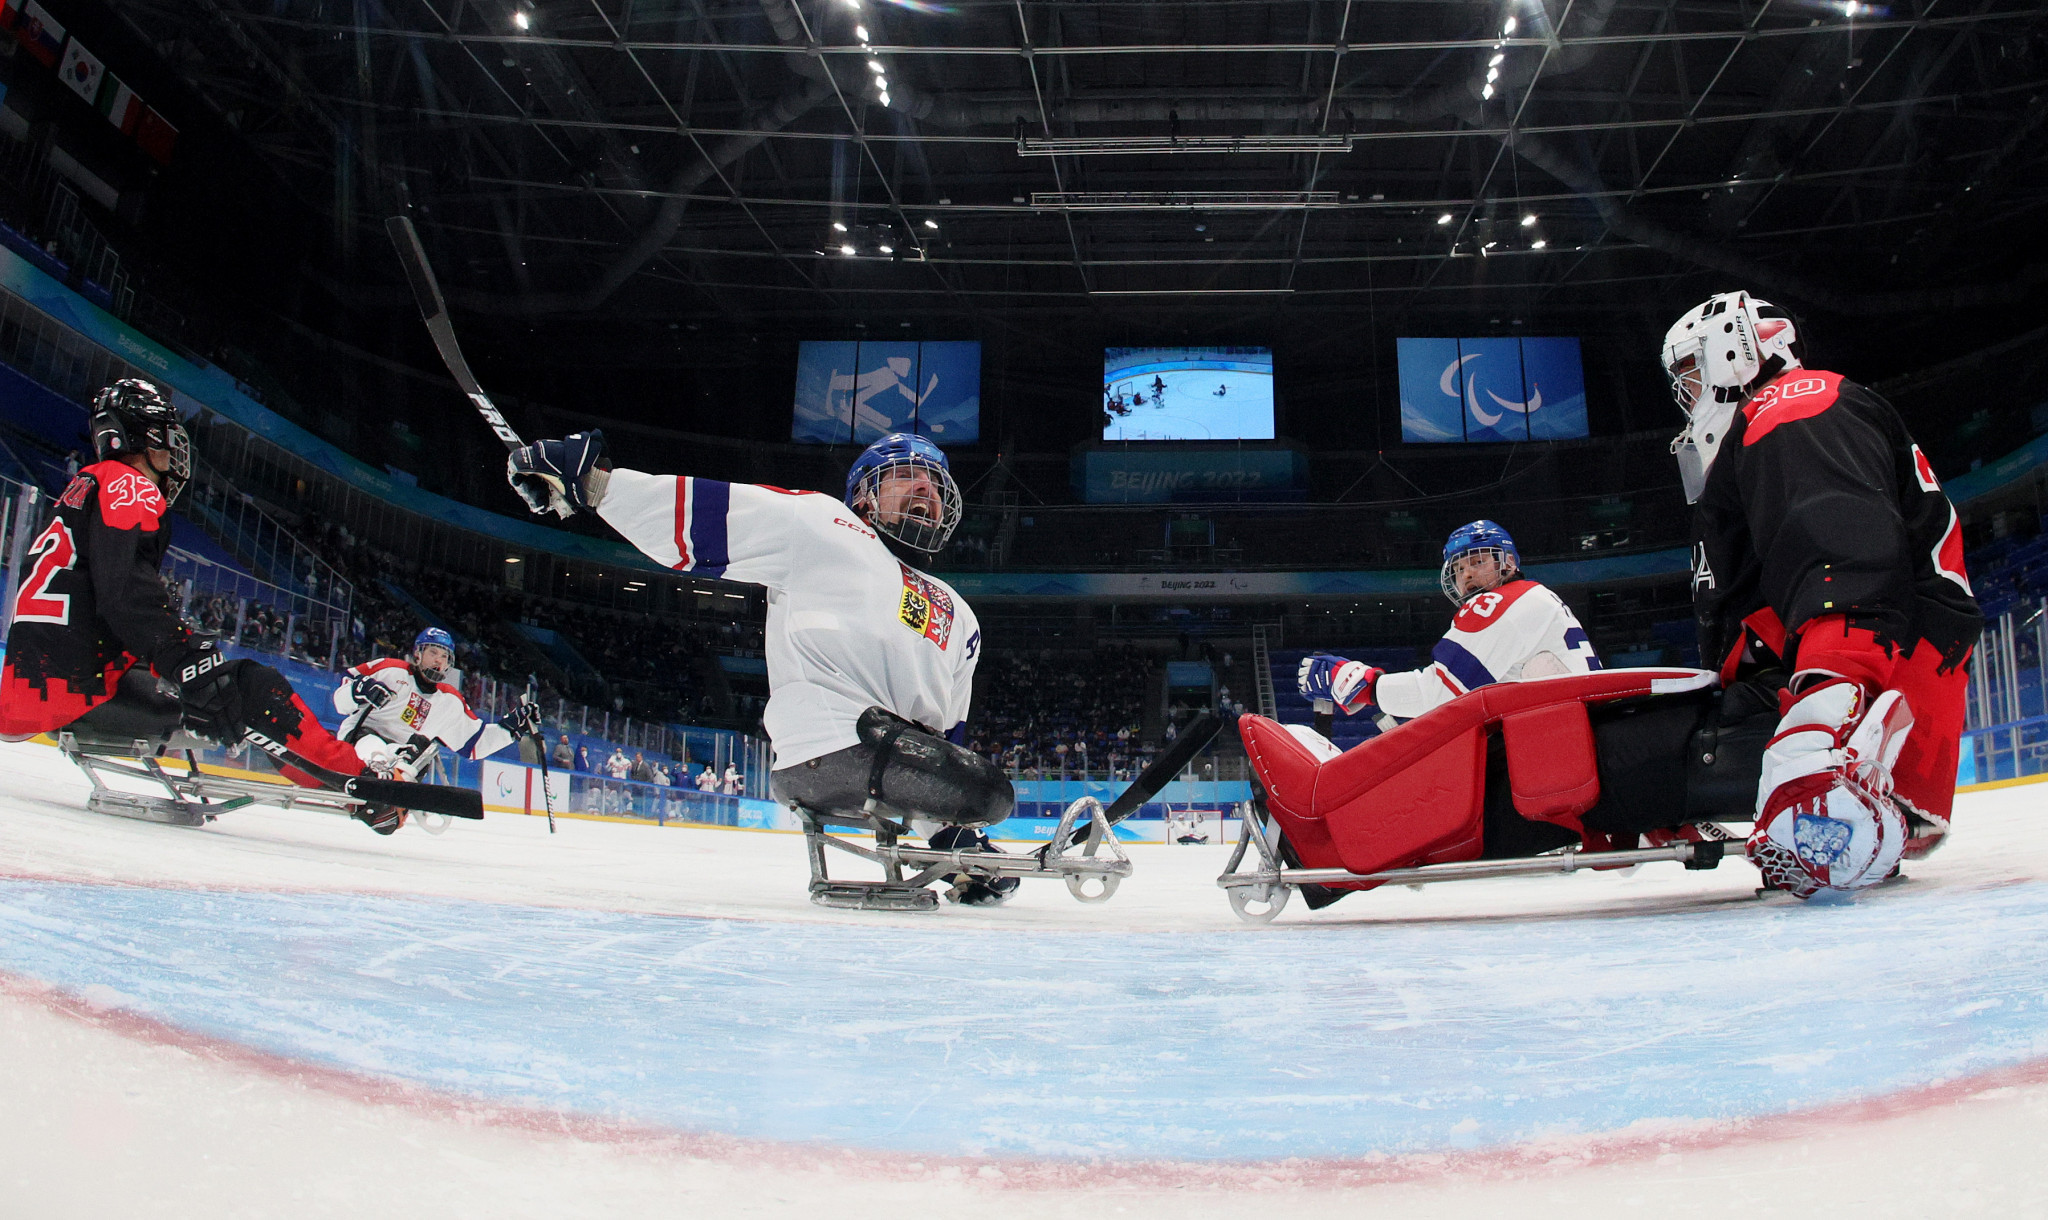 The United States advanced to the semi-finals of the Para ice hockey tournament ©Getty Images